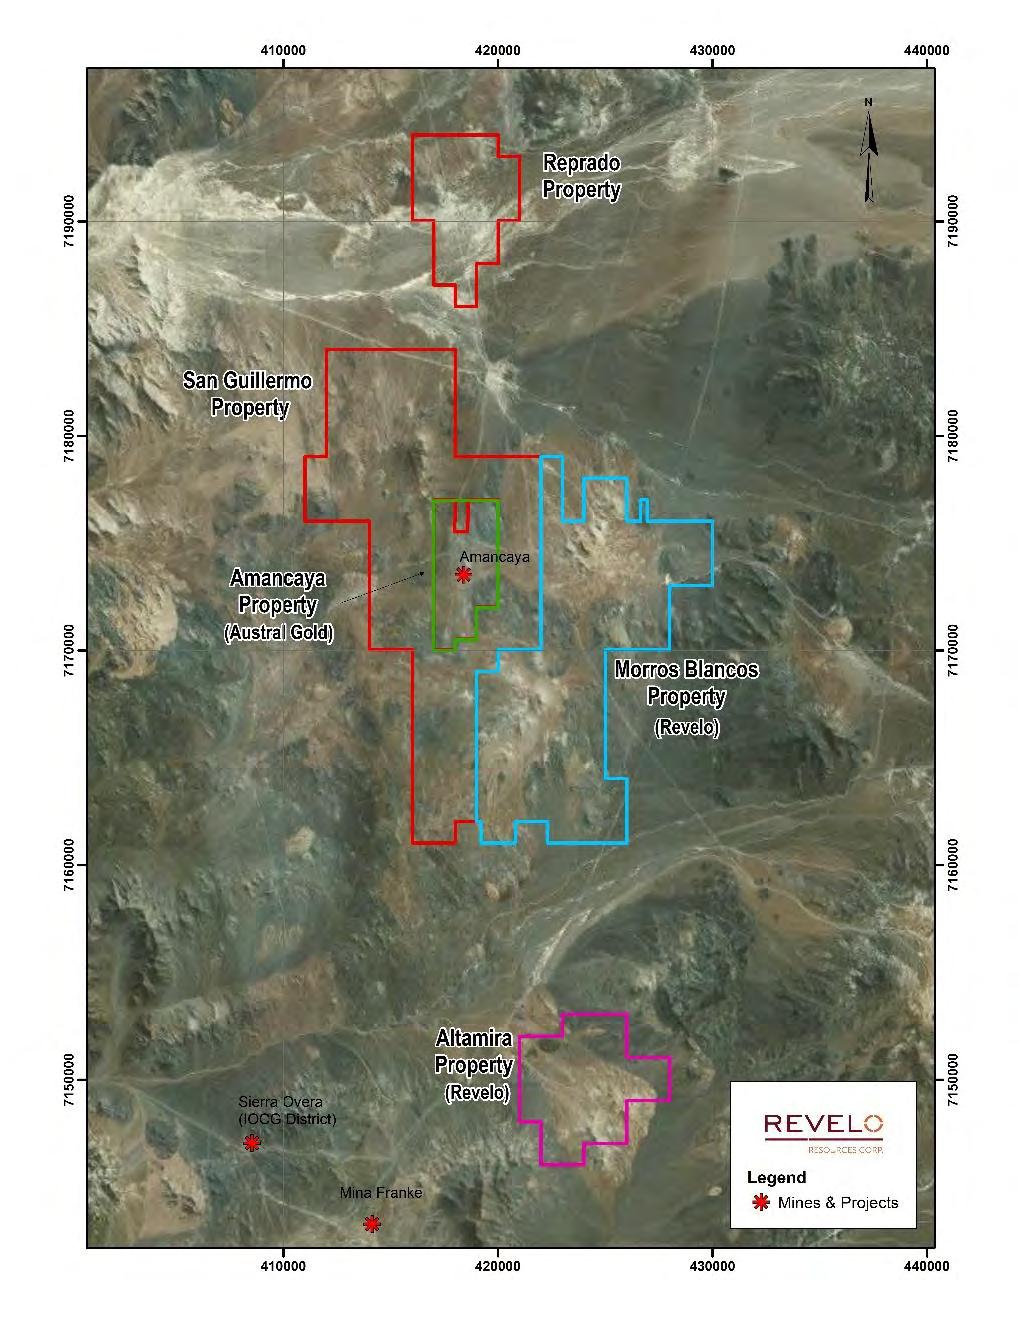 District Geological Setting Reprado & San Guillermo Access to PanAmerican Highway REPRADO PROPERTY (stral Gold ~2,750 Ha) -